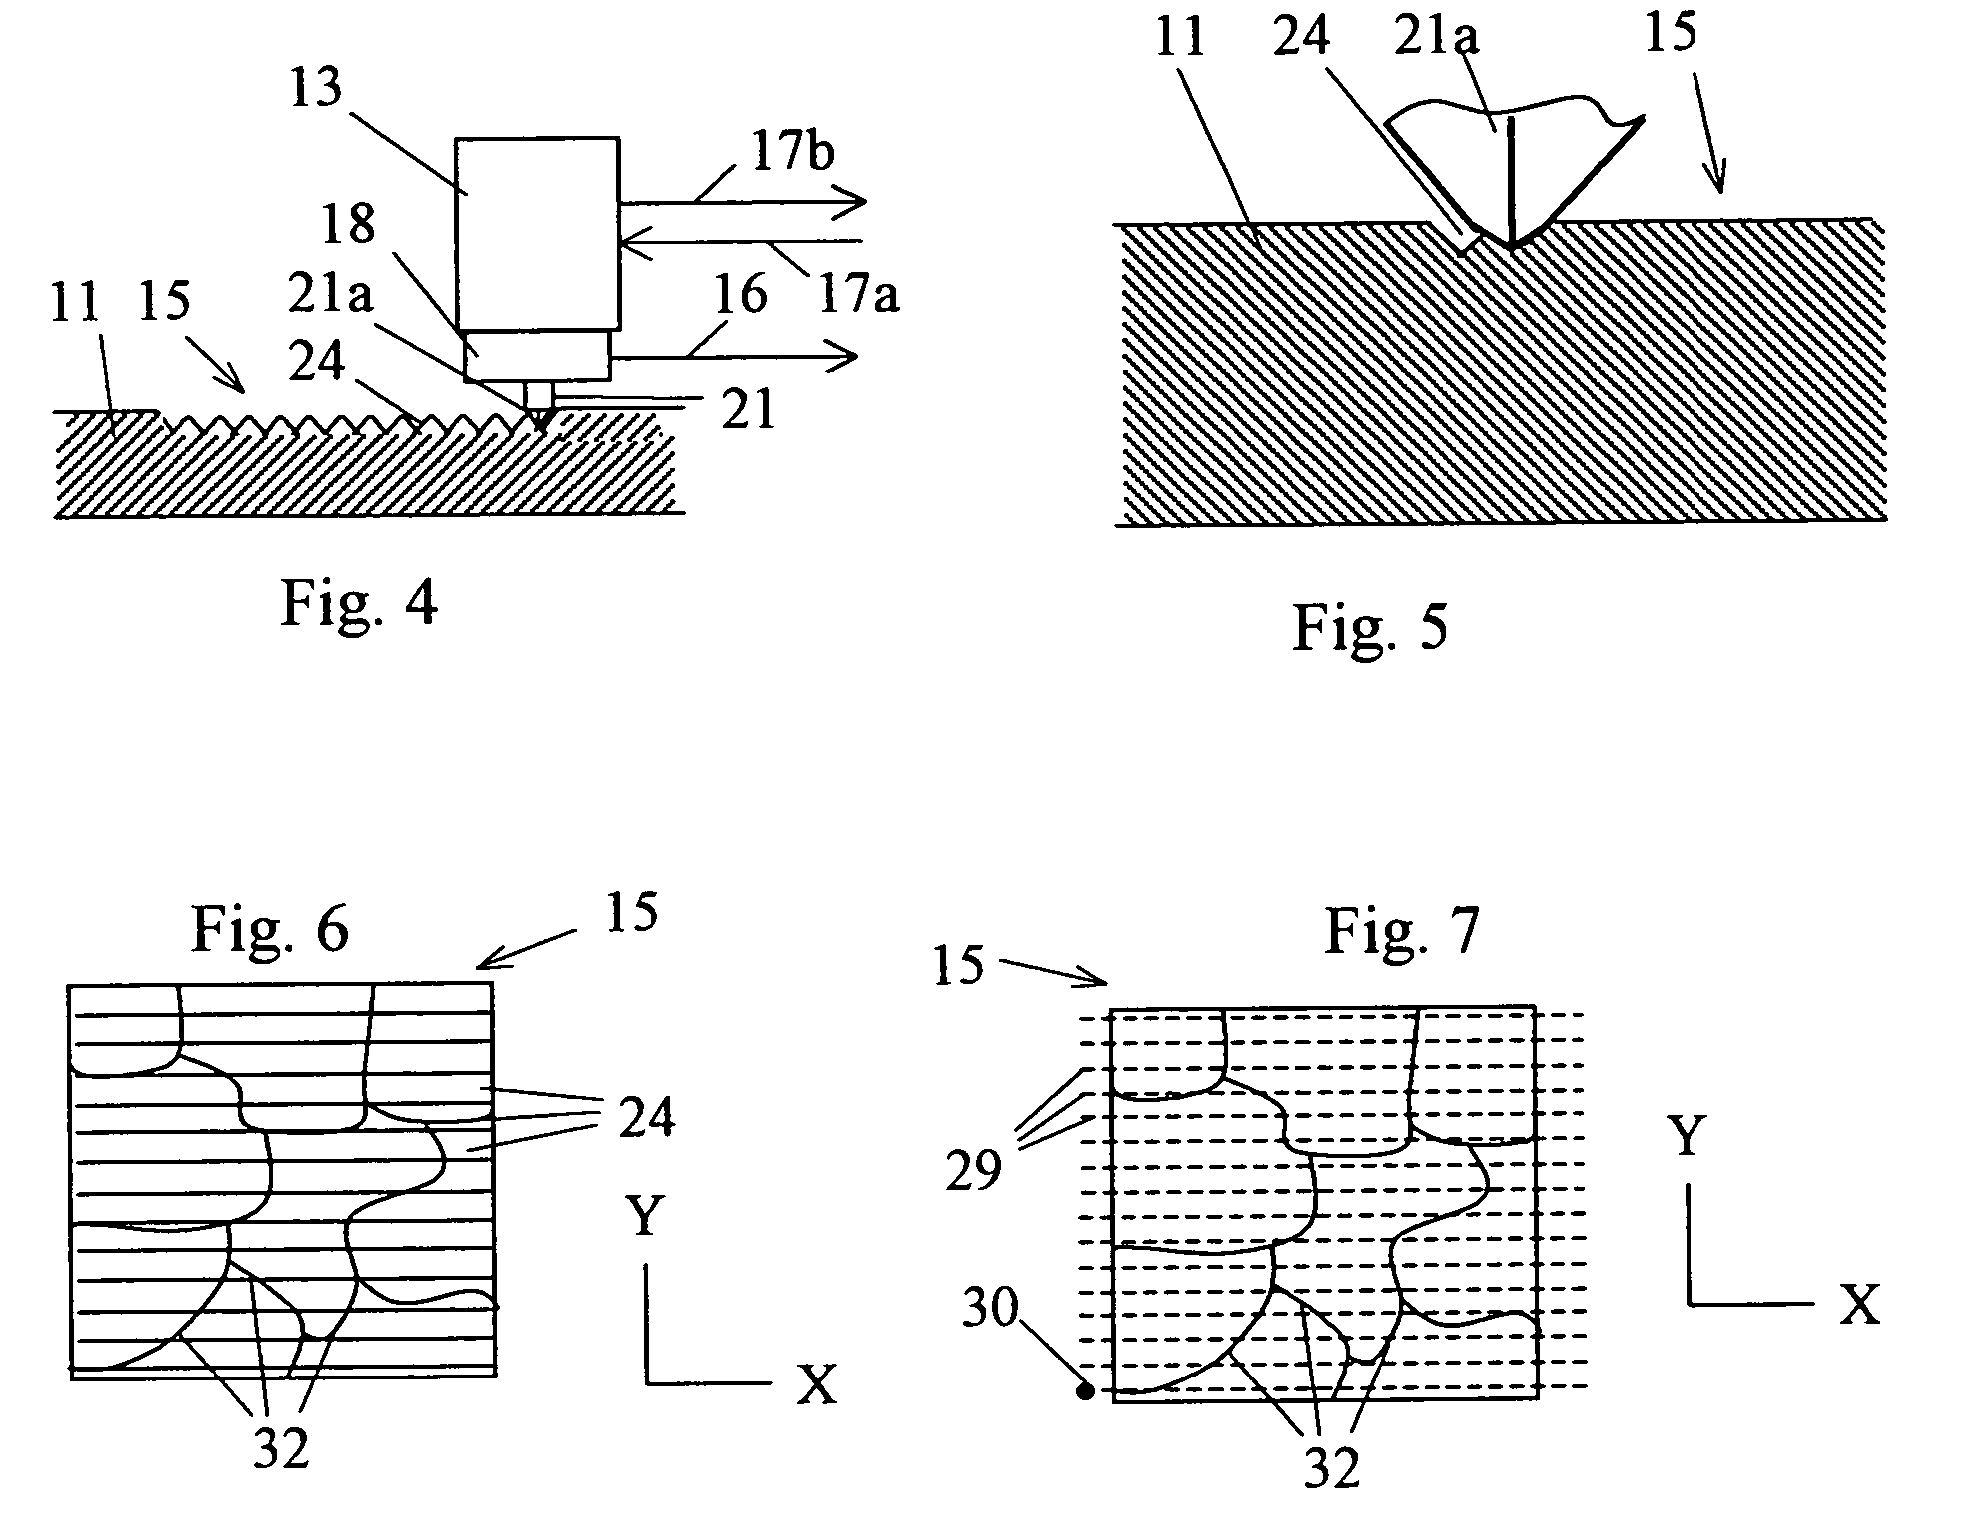 Method for observation of microstructural surface features in heterogeneous materials